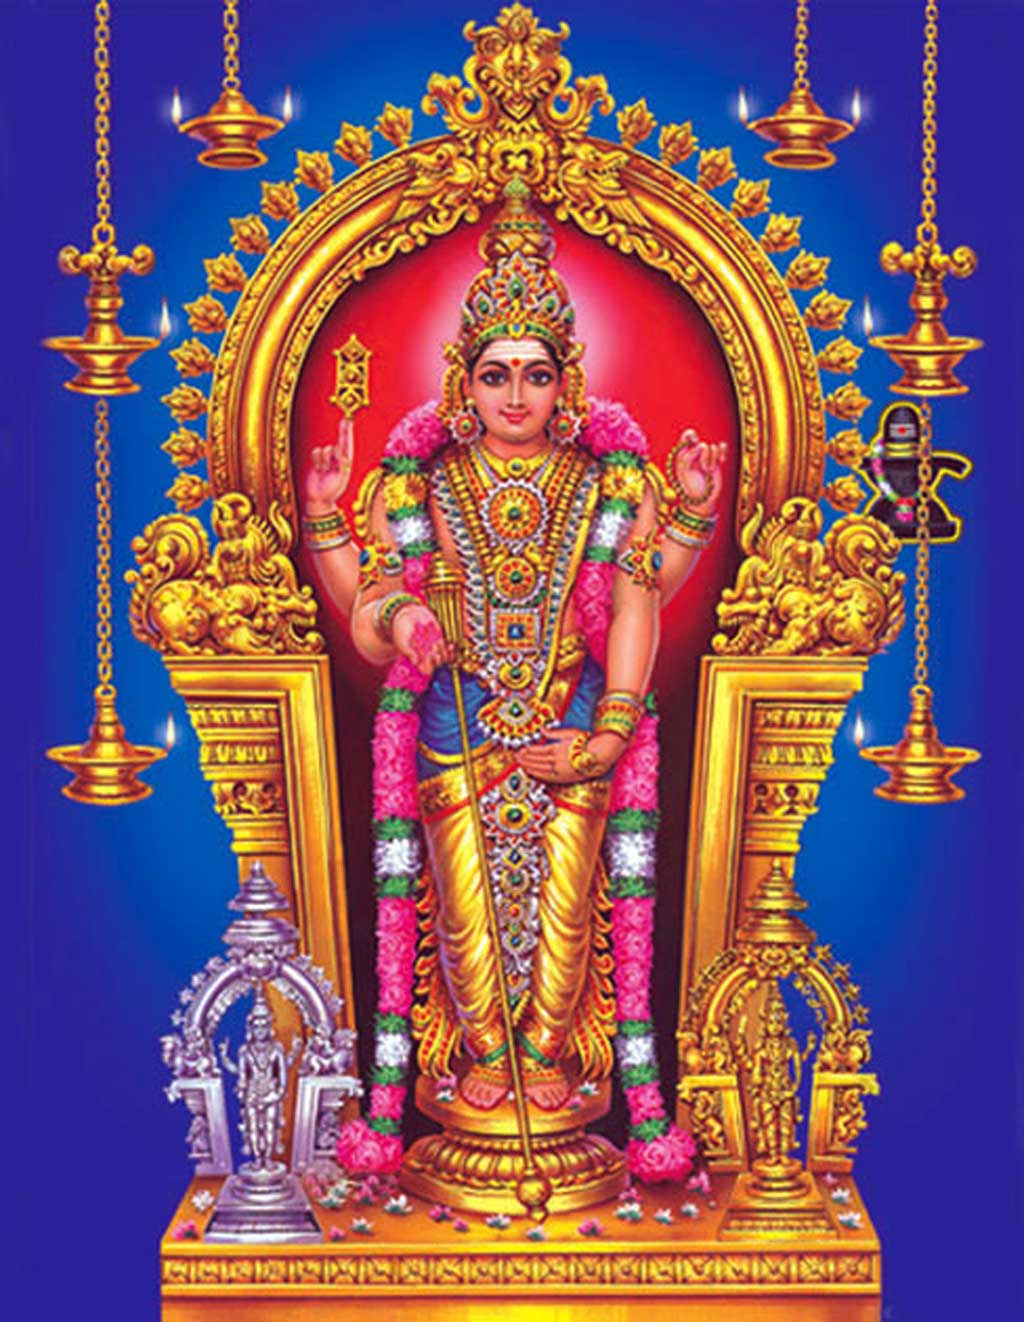 MOST FAMOUS IN THE WORLD: LORD MURUGA